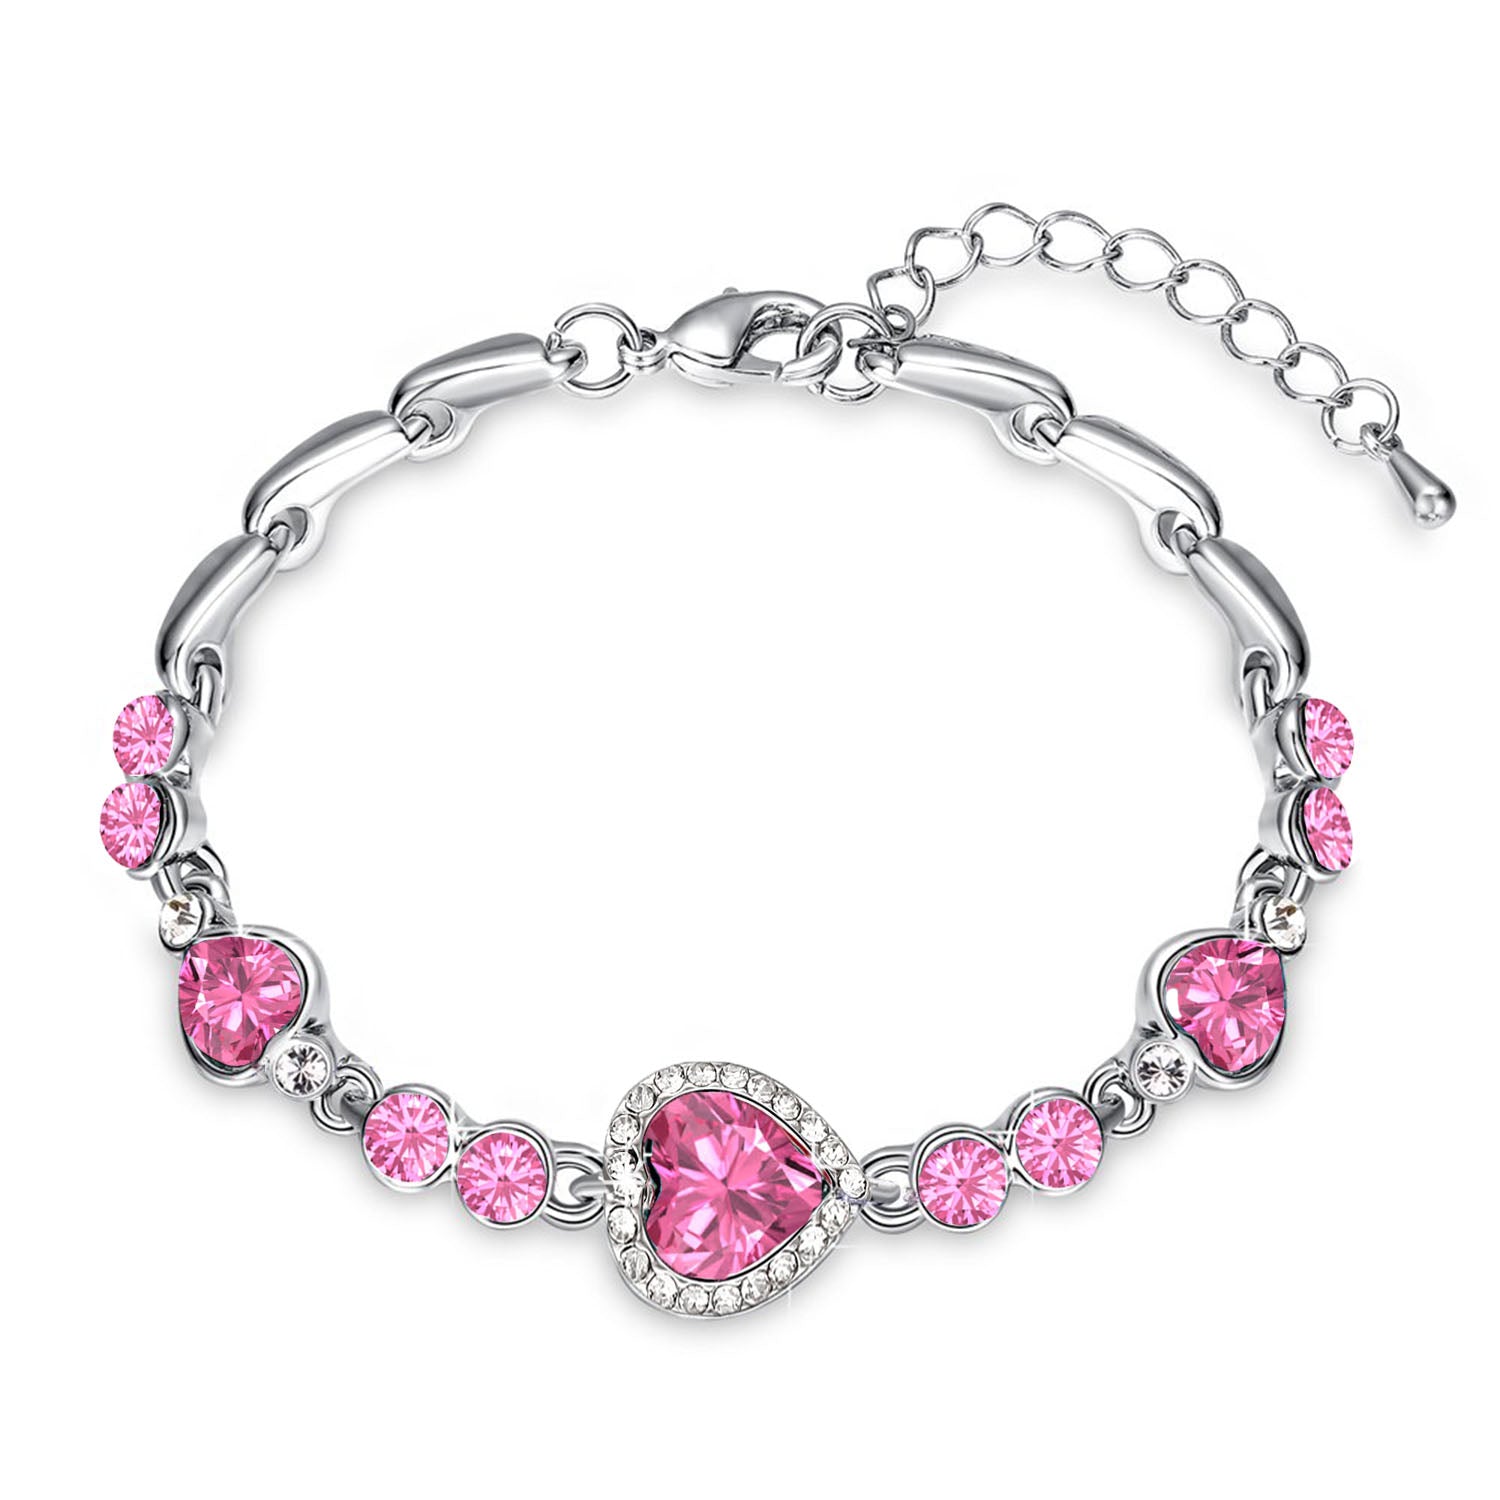 Mahi Rhodium Plated Valentine Collection Magical Love Heart Bracelet with Pink Crystal Stones